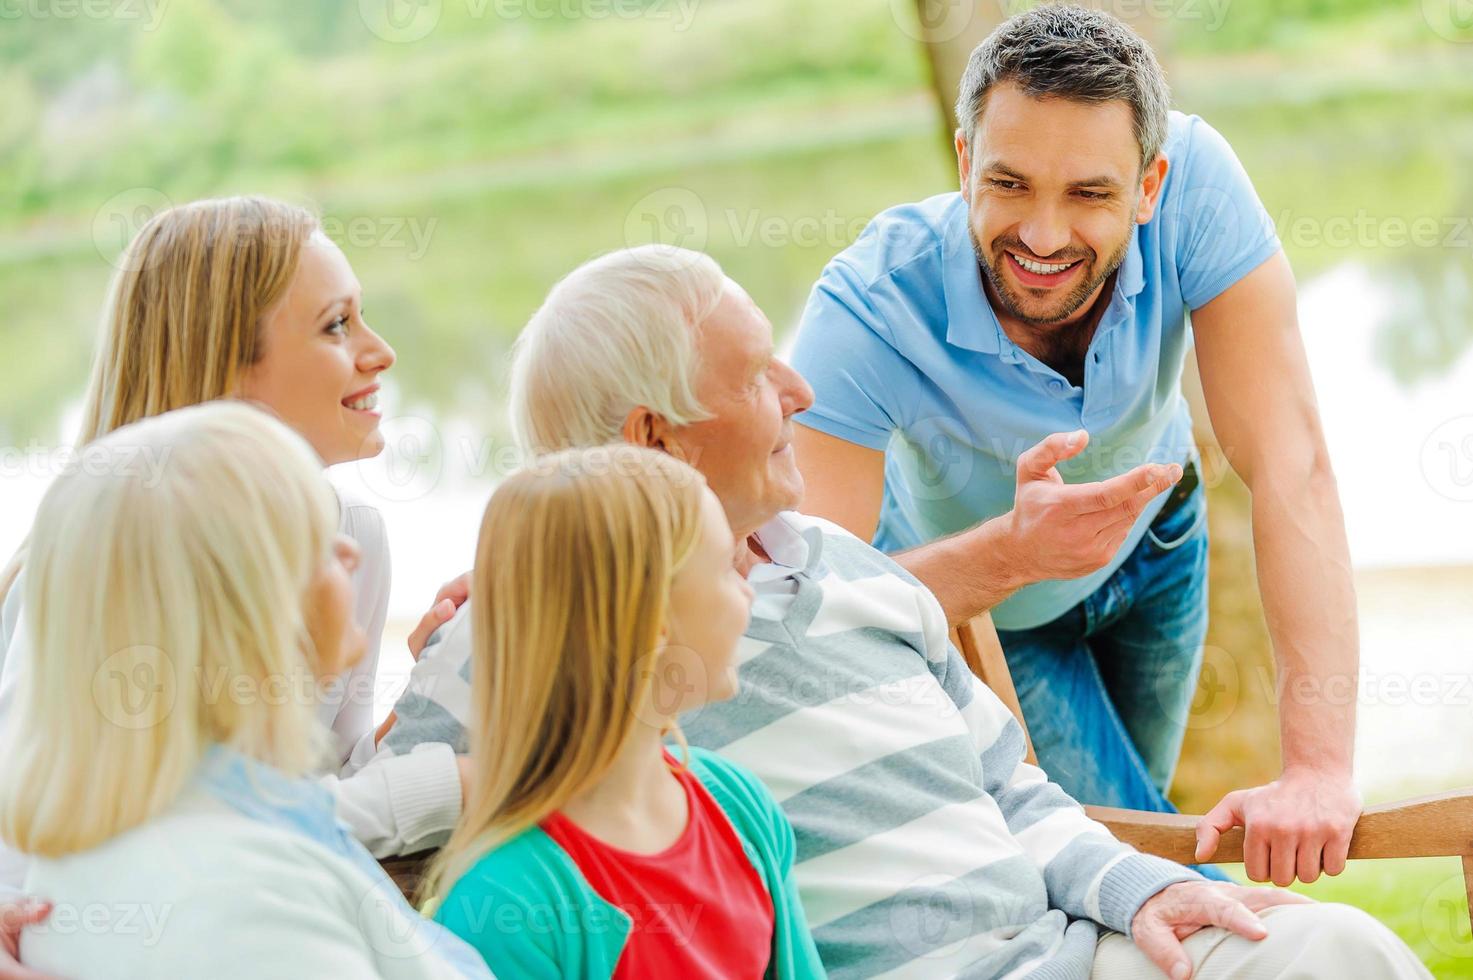 Spending time with family. Happy family of five people talking to each other and smiling while sitting outdoors together photo